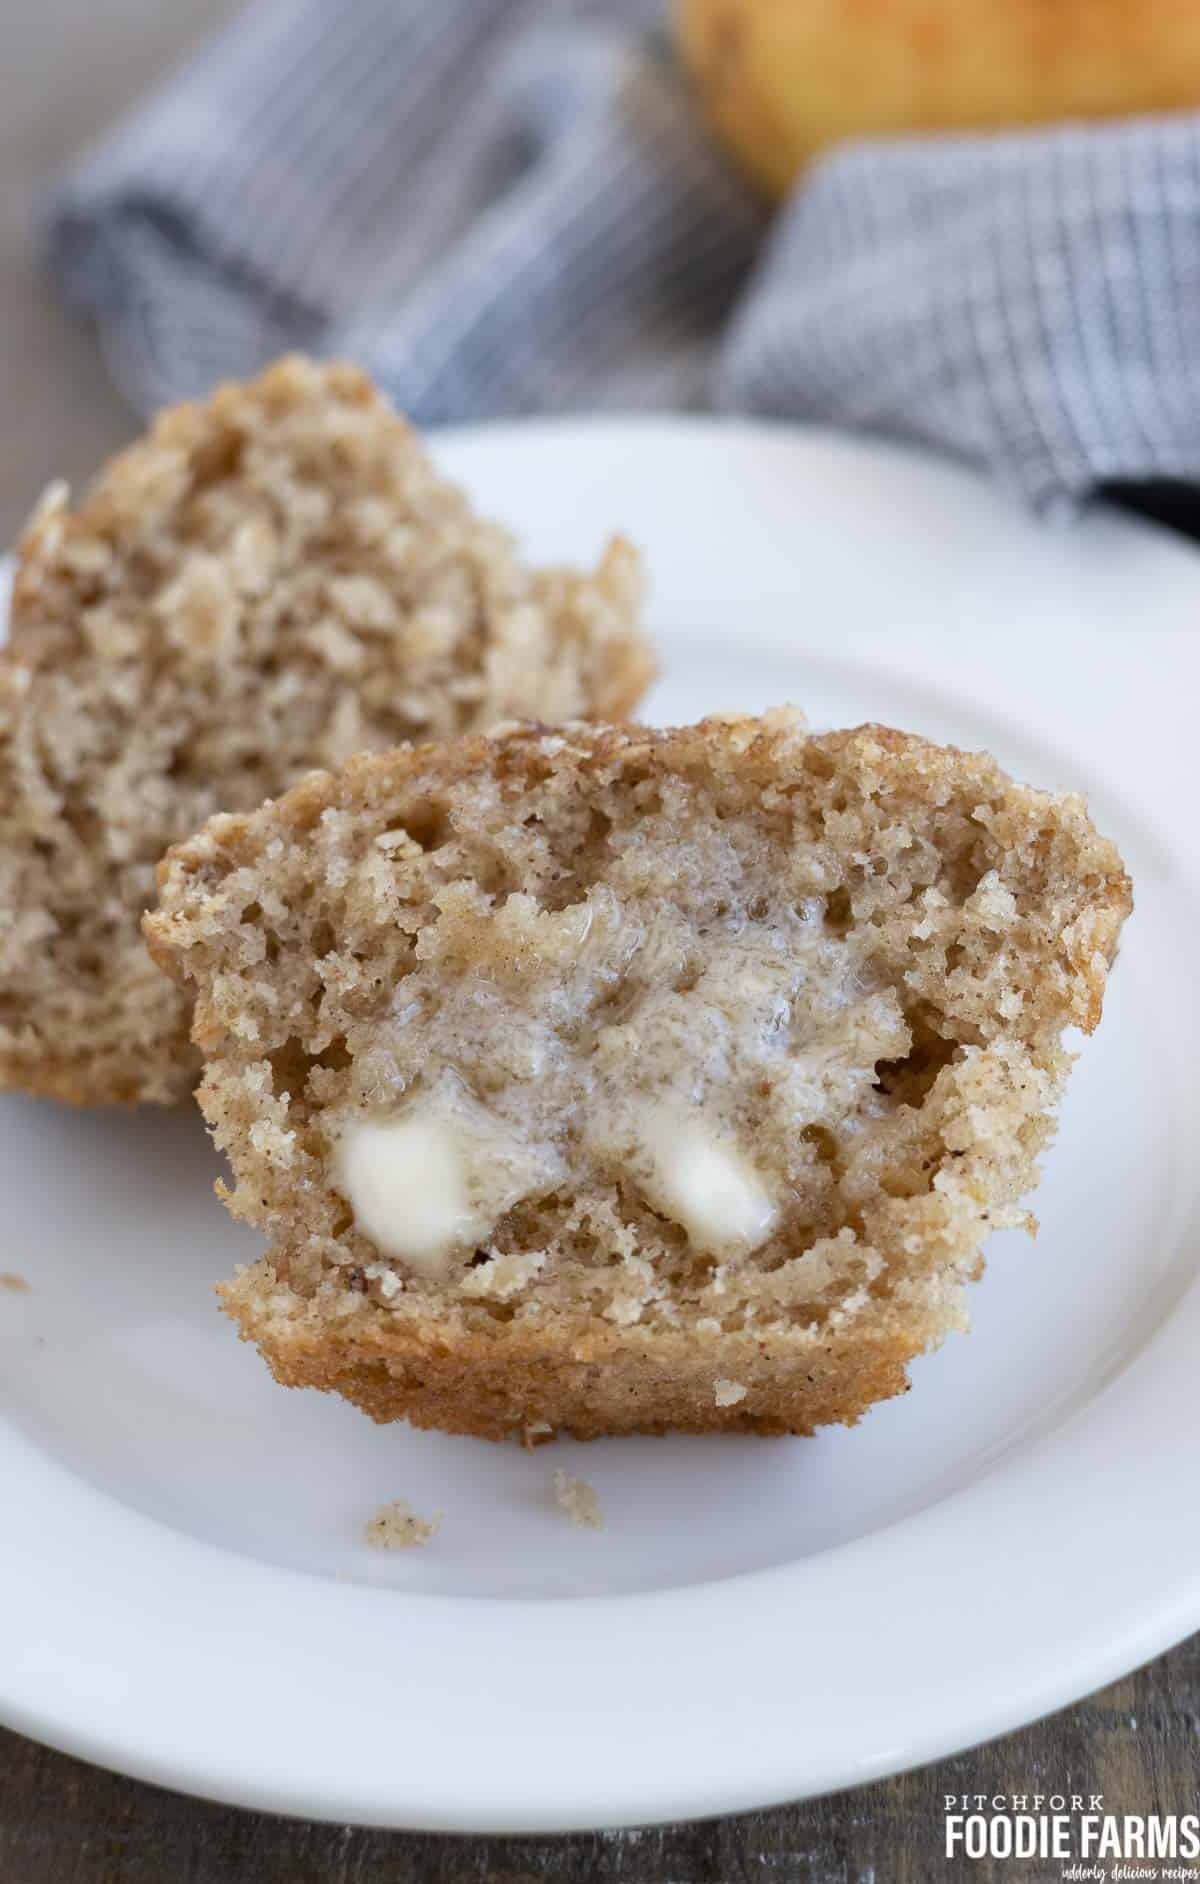 A cinnamon pear muffin cut in half with melted butter spread on it.